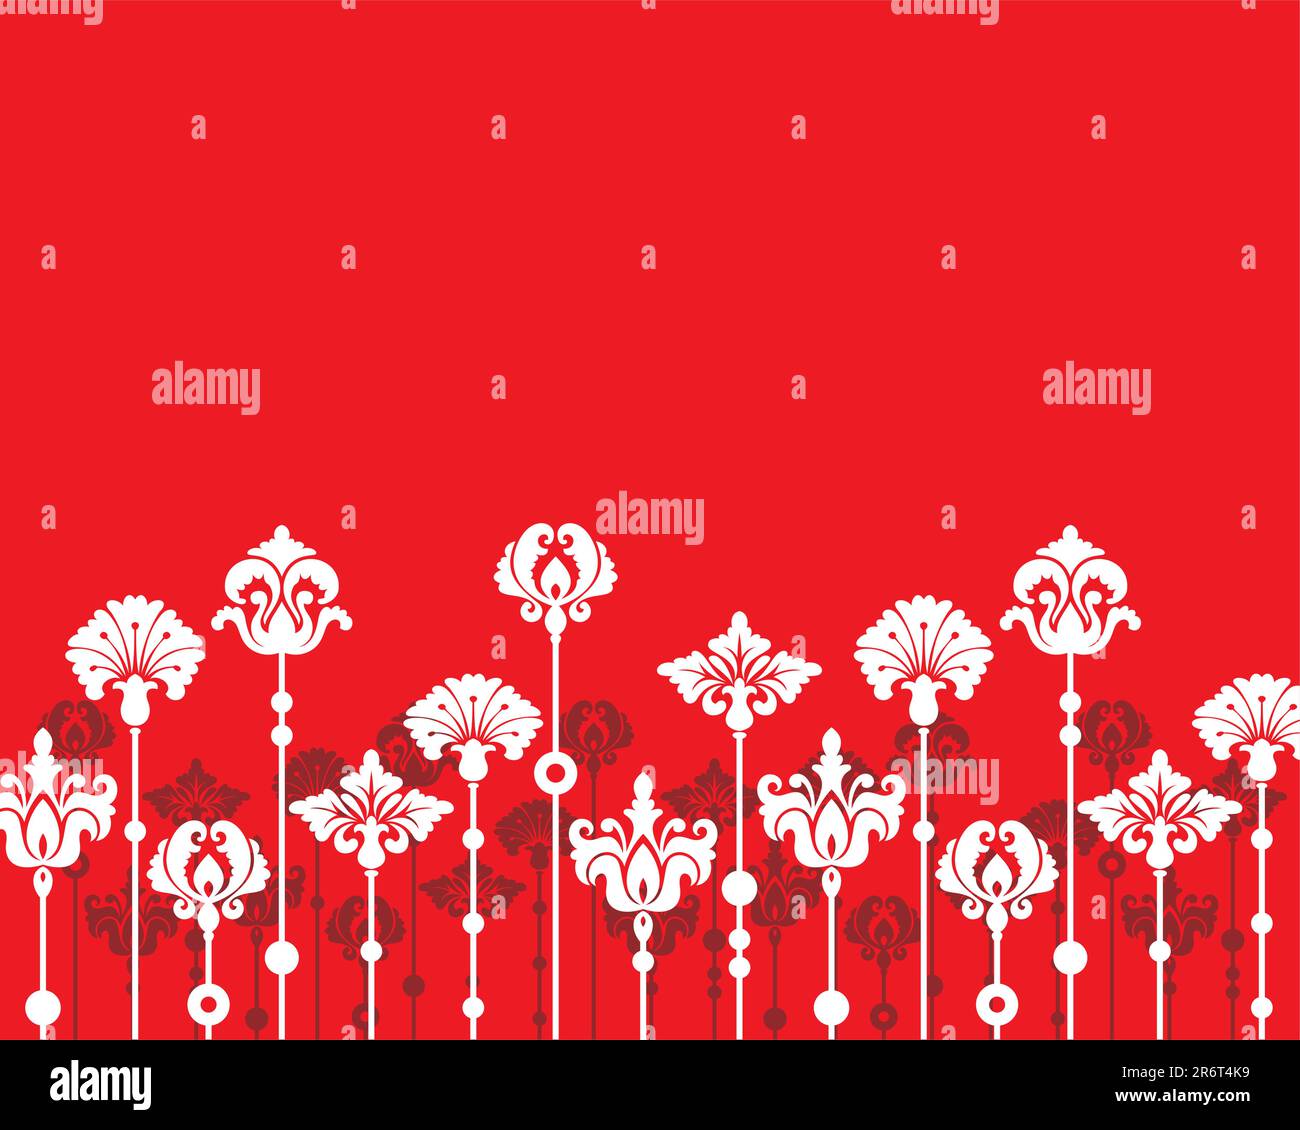 vector ornament In flower style Stock Vector